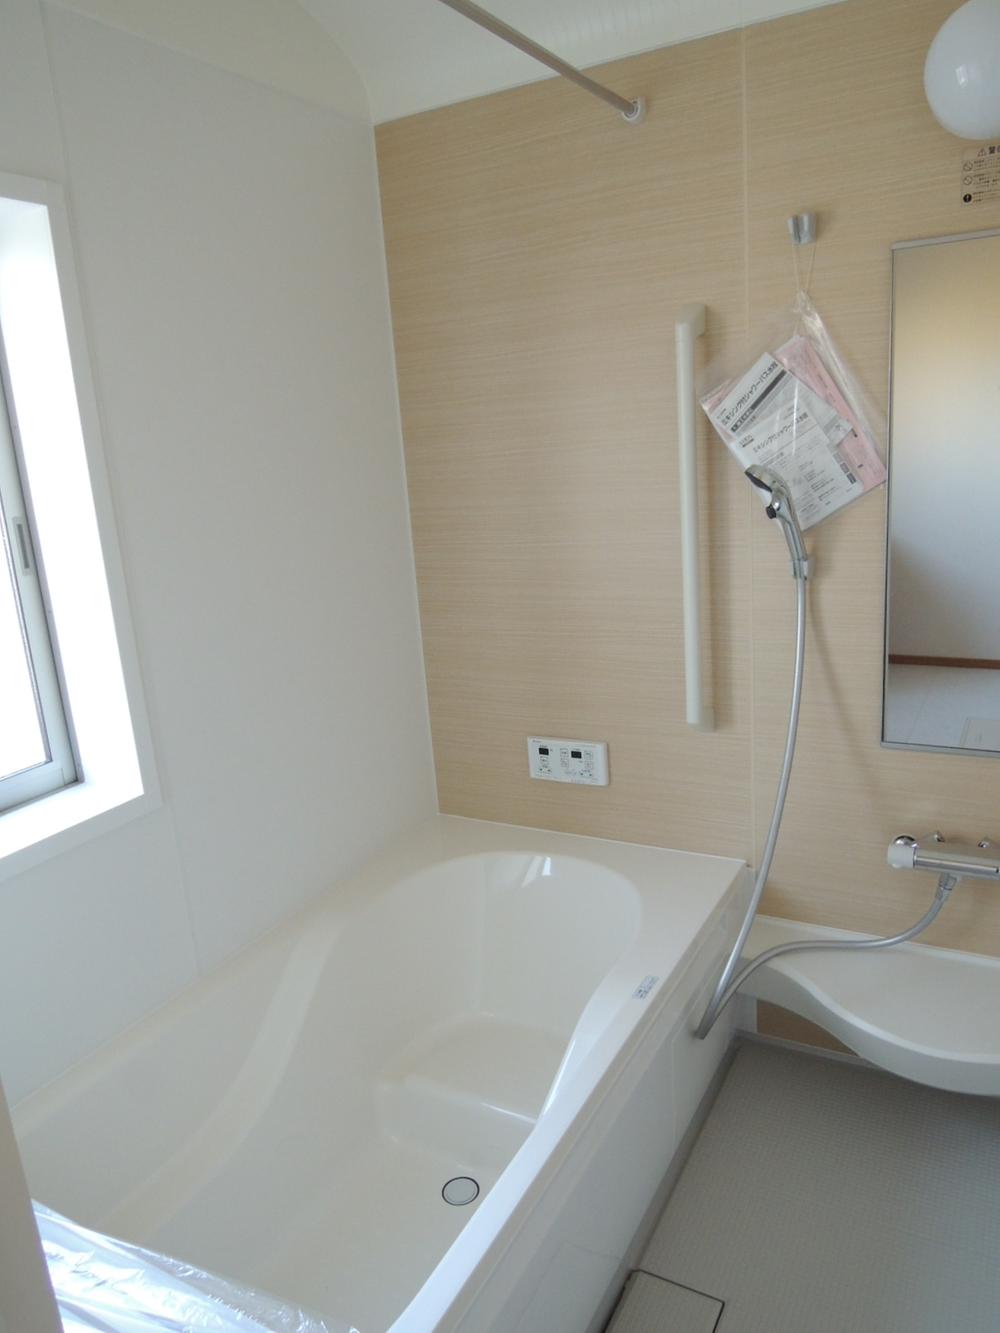 Same specifications photo (bathroom). With bathroom dryer. 